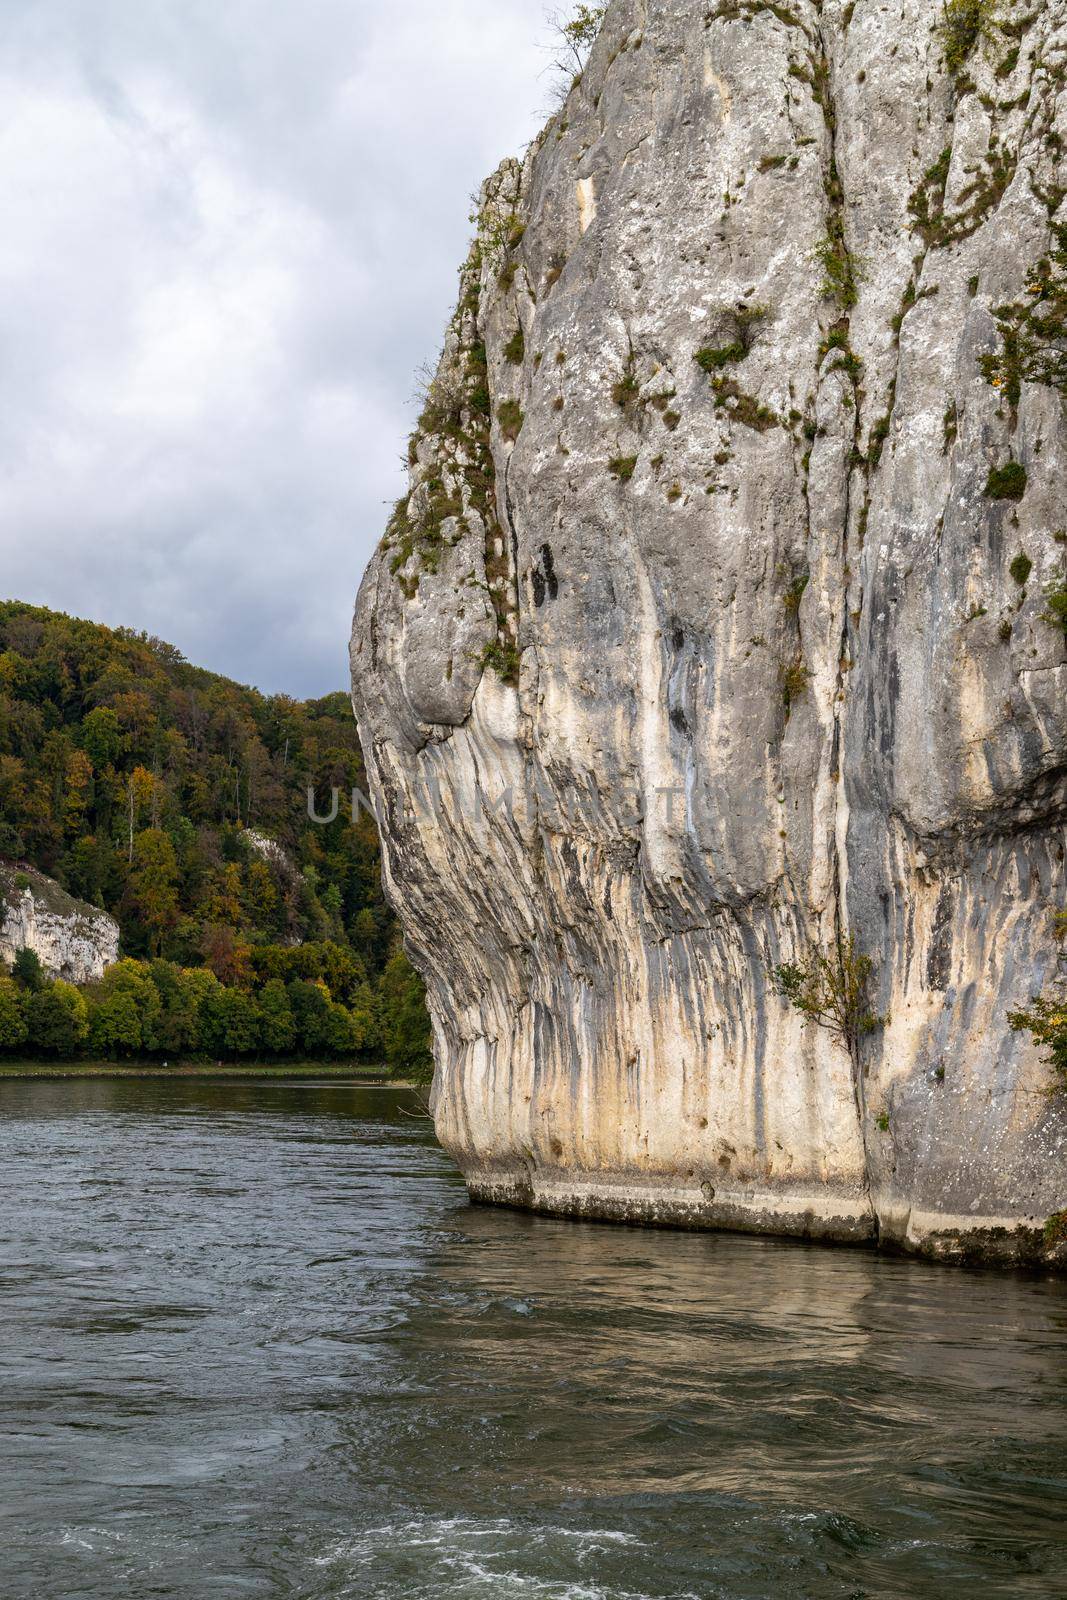 Nature reserve at Danube river breakthrough near Kelheim, Bavaria, Germany in autumn with limestone rock formations and plants with colorful leaves, autumnal impressions